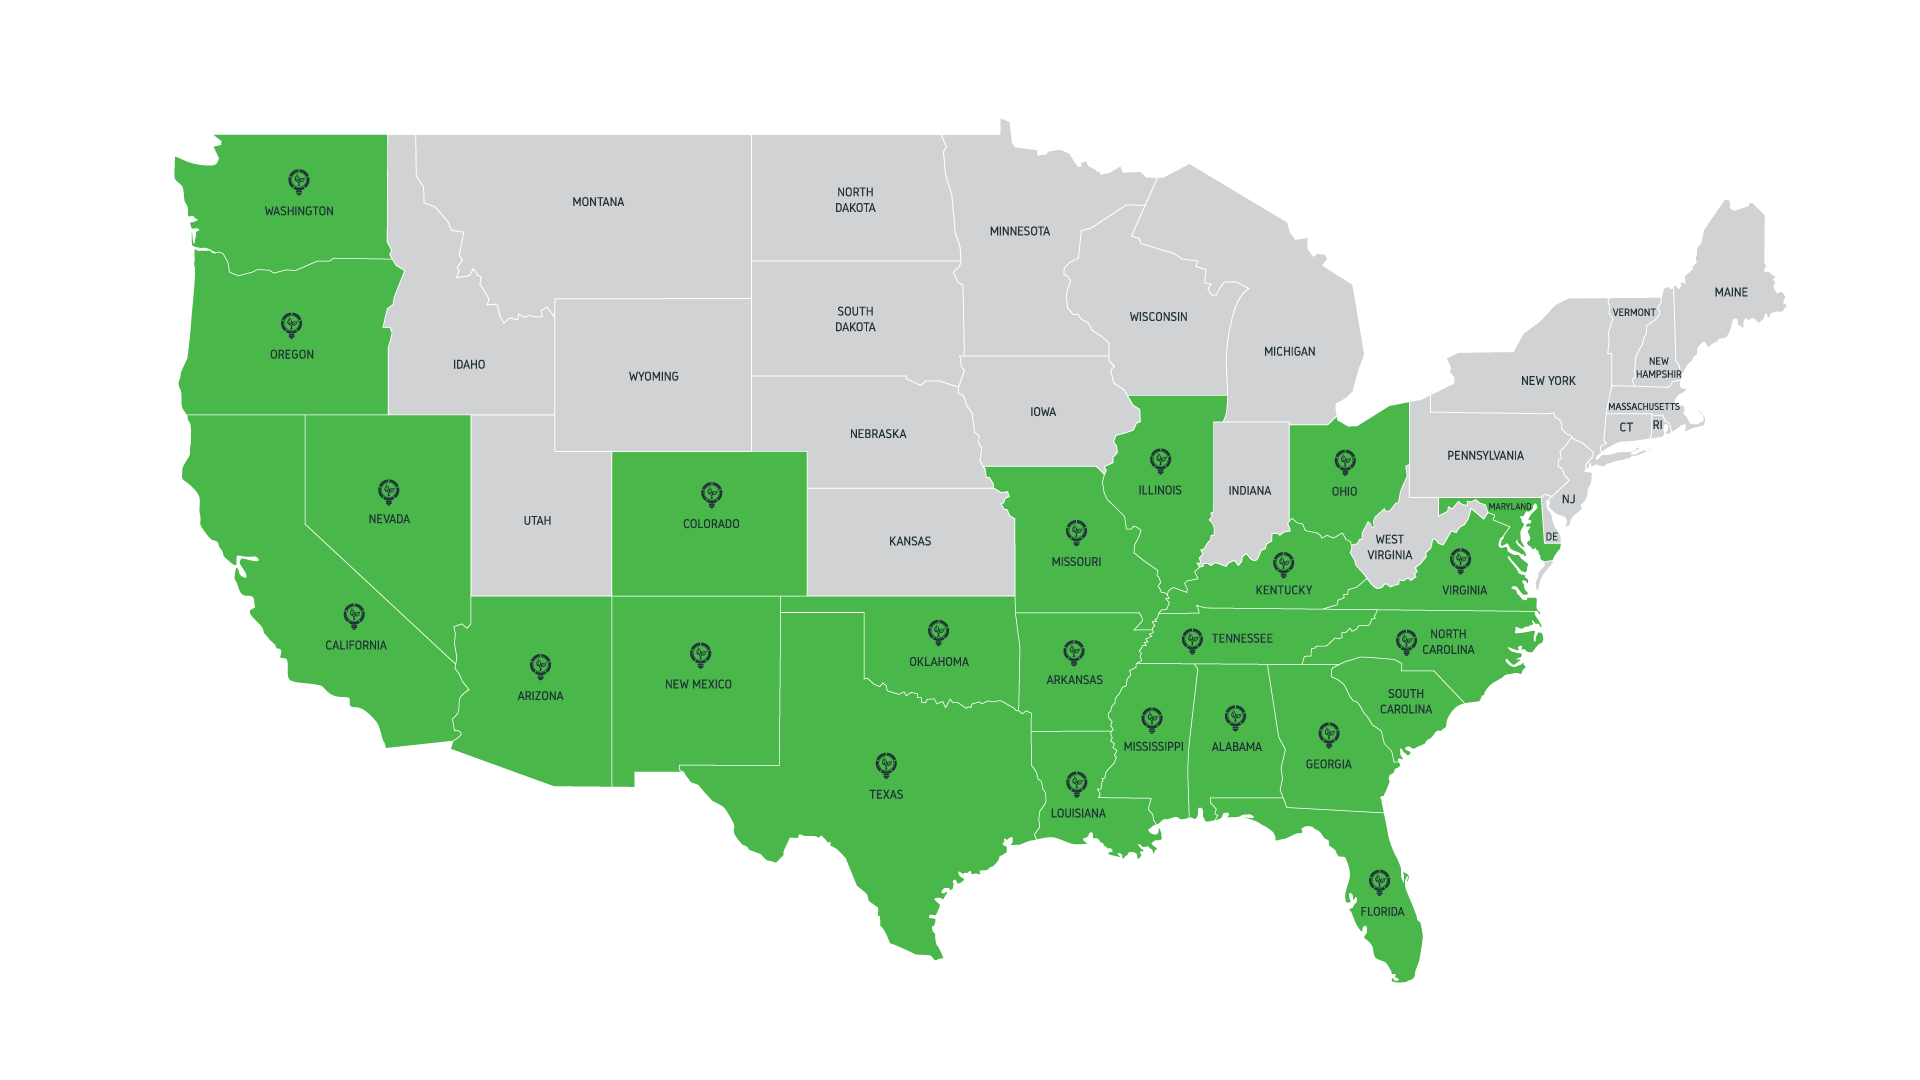 US map highlighting in green the states where Greenlogic has completed projects, with the rest of the states in gray.